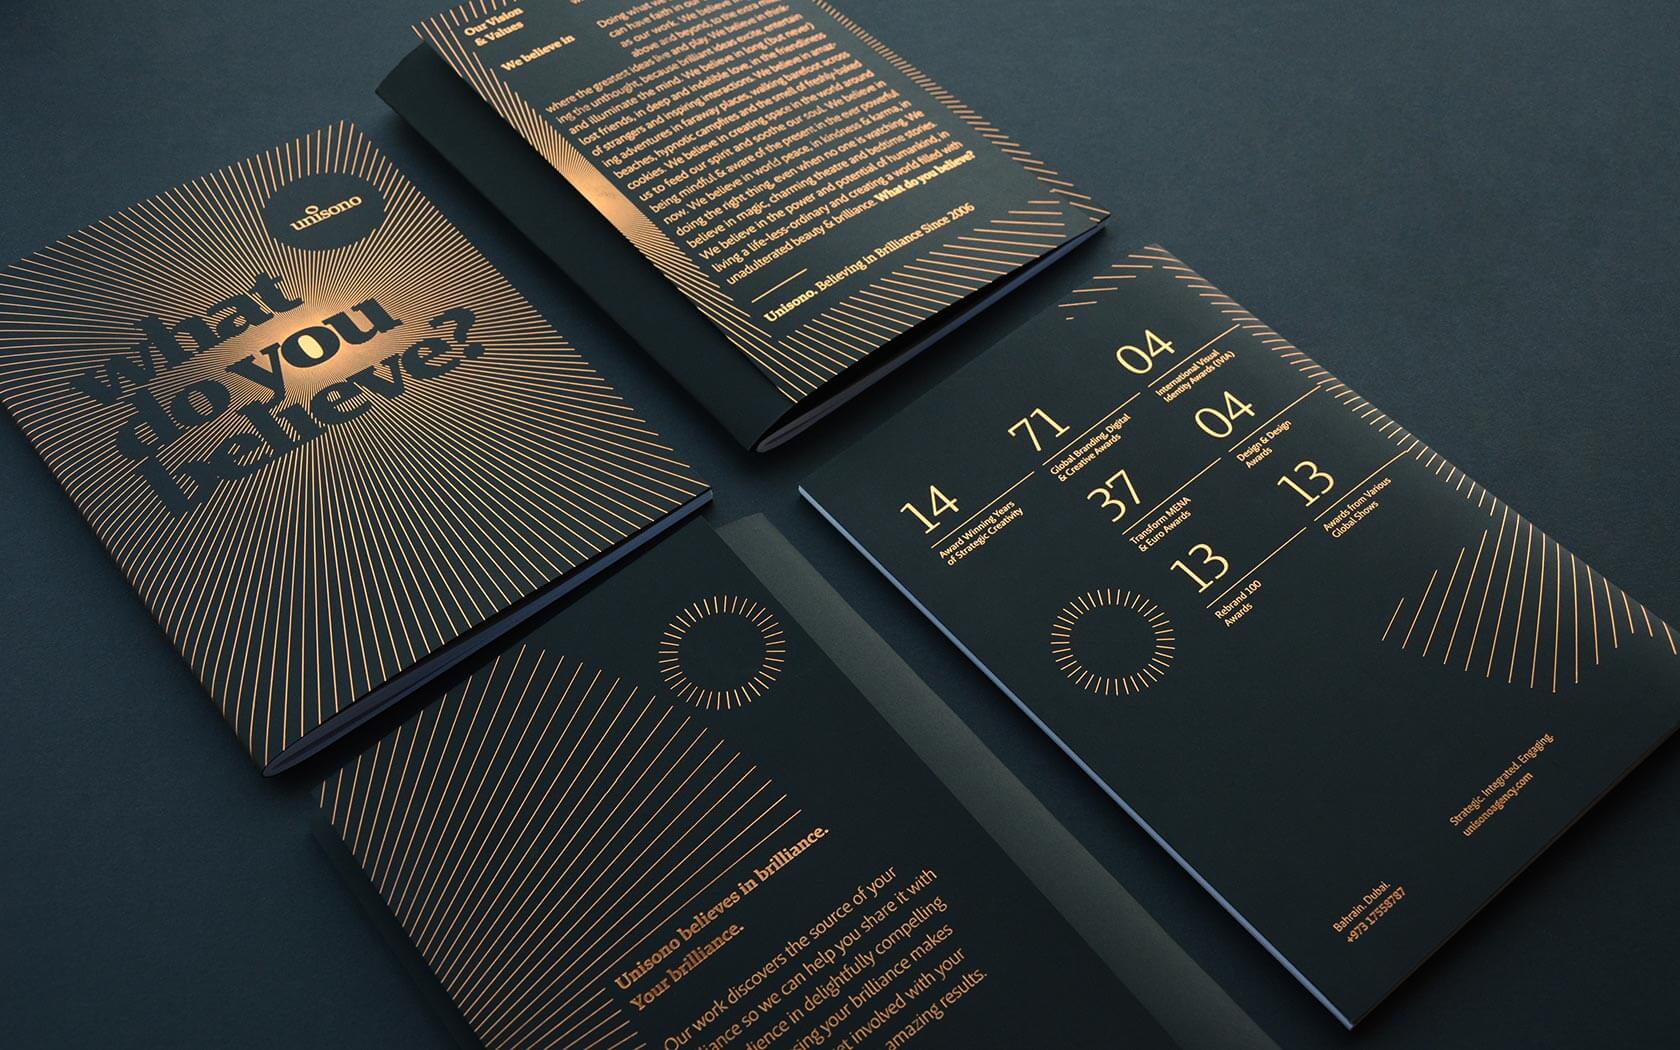 Unisono's notebook Front and back covers Foiling with inside covers.